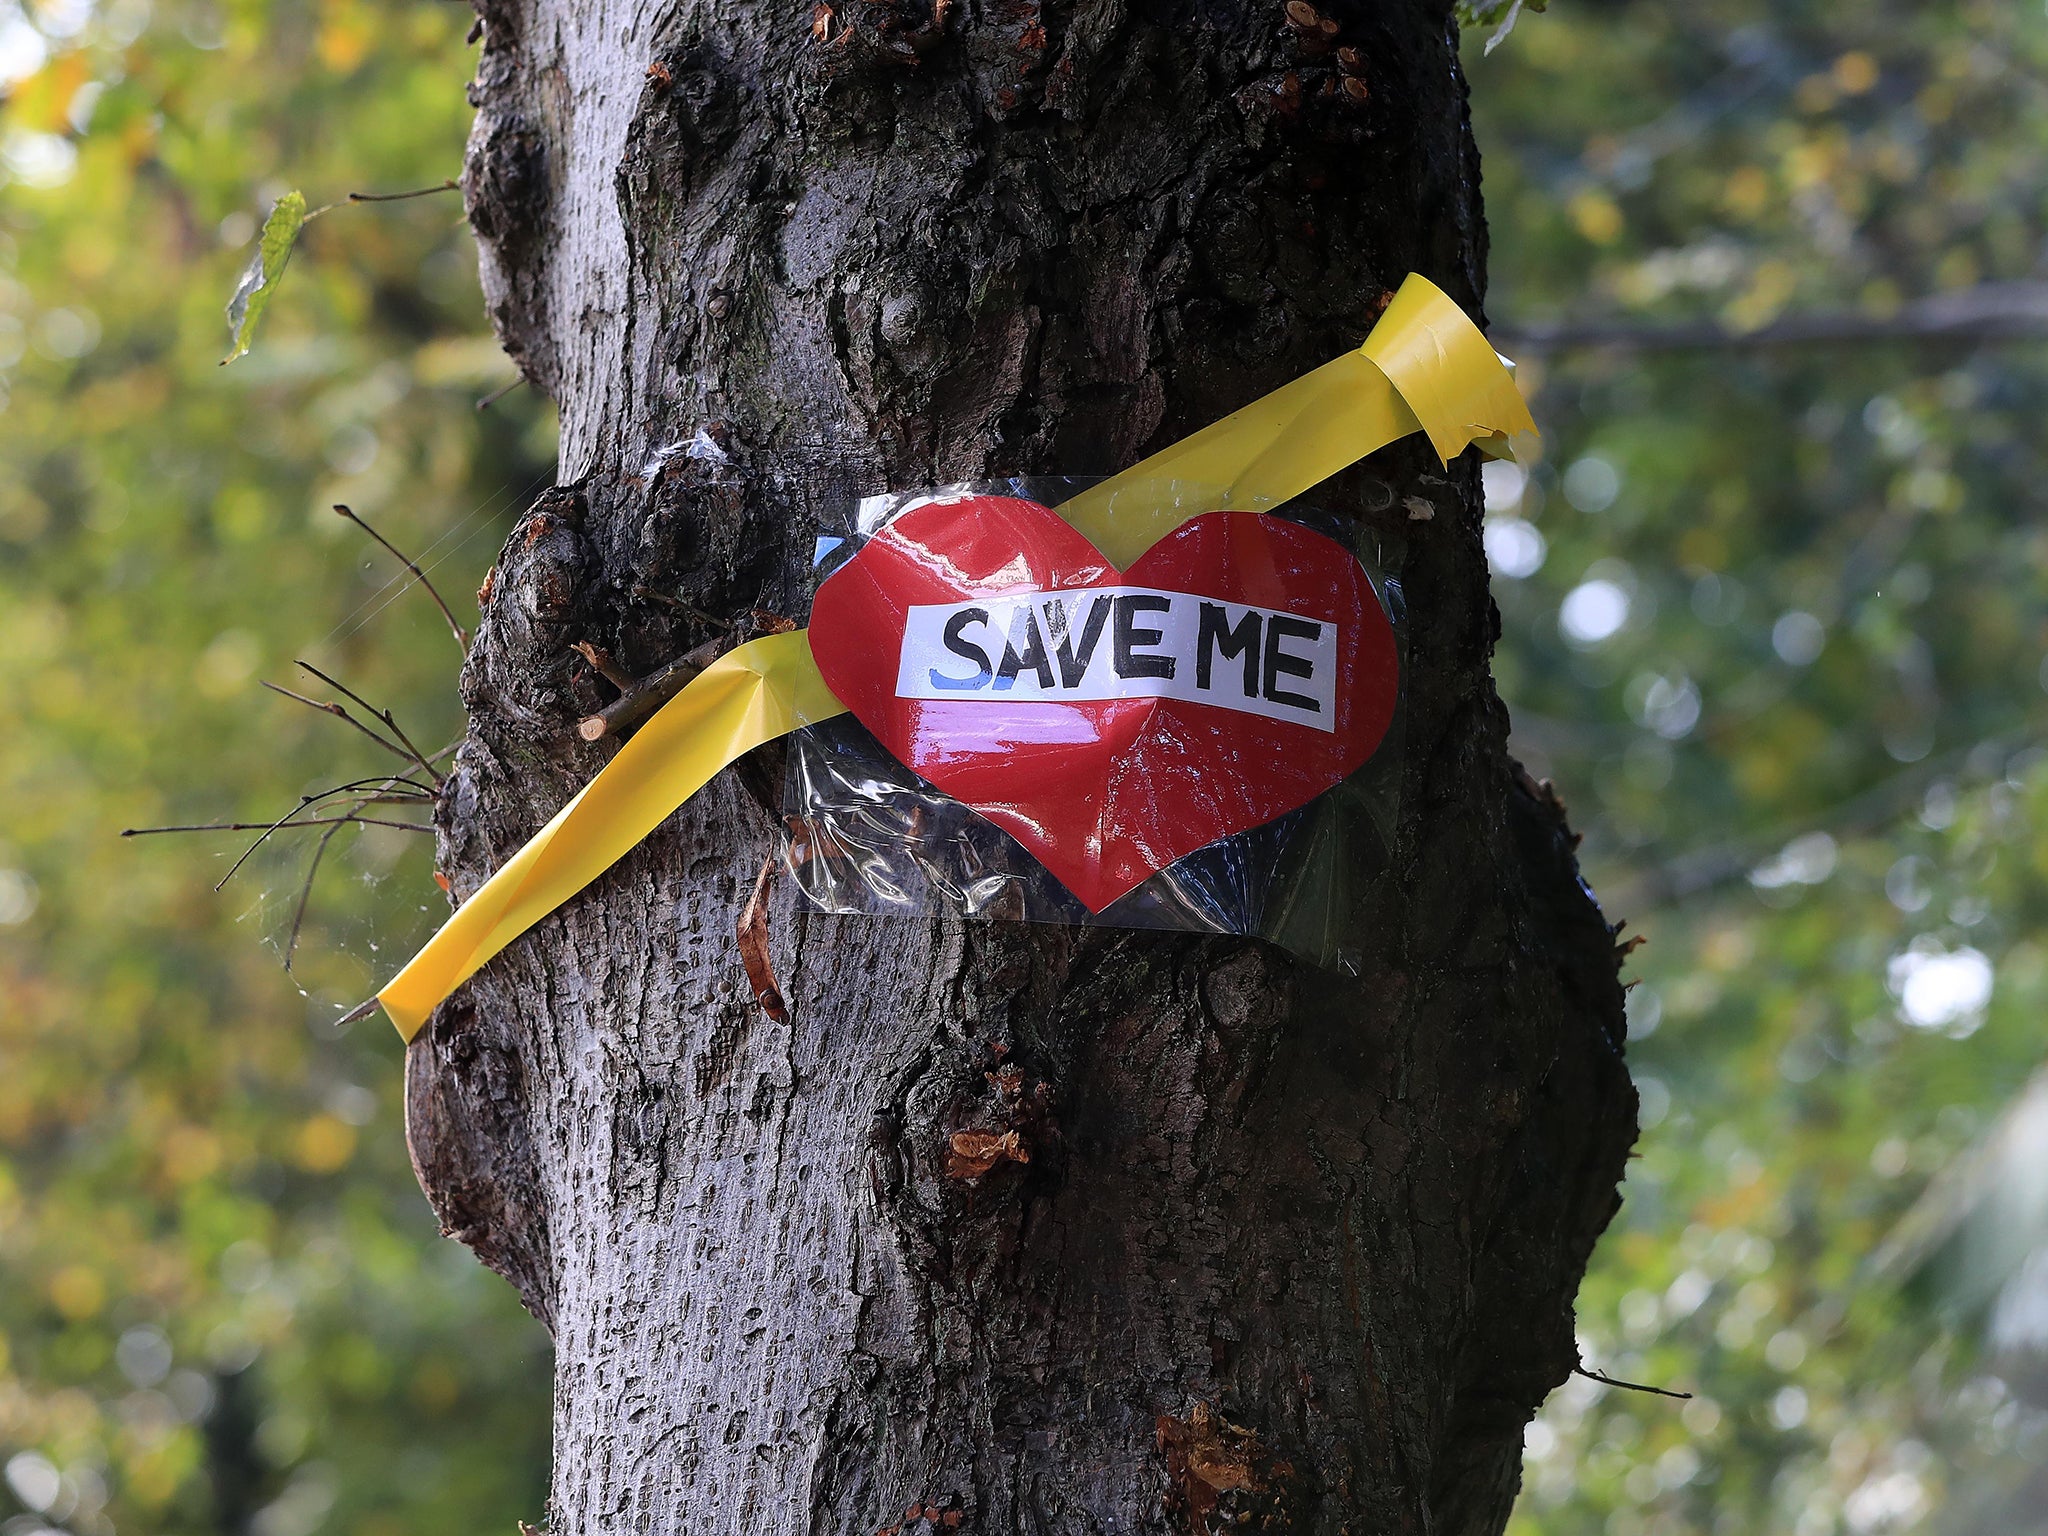 Council &apos;reliant on police&apos; to protect workers carrying out controversial tree felling programme, report says